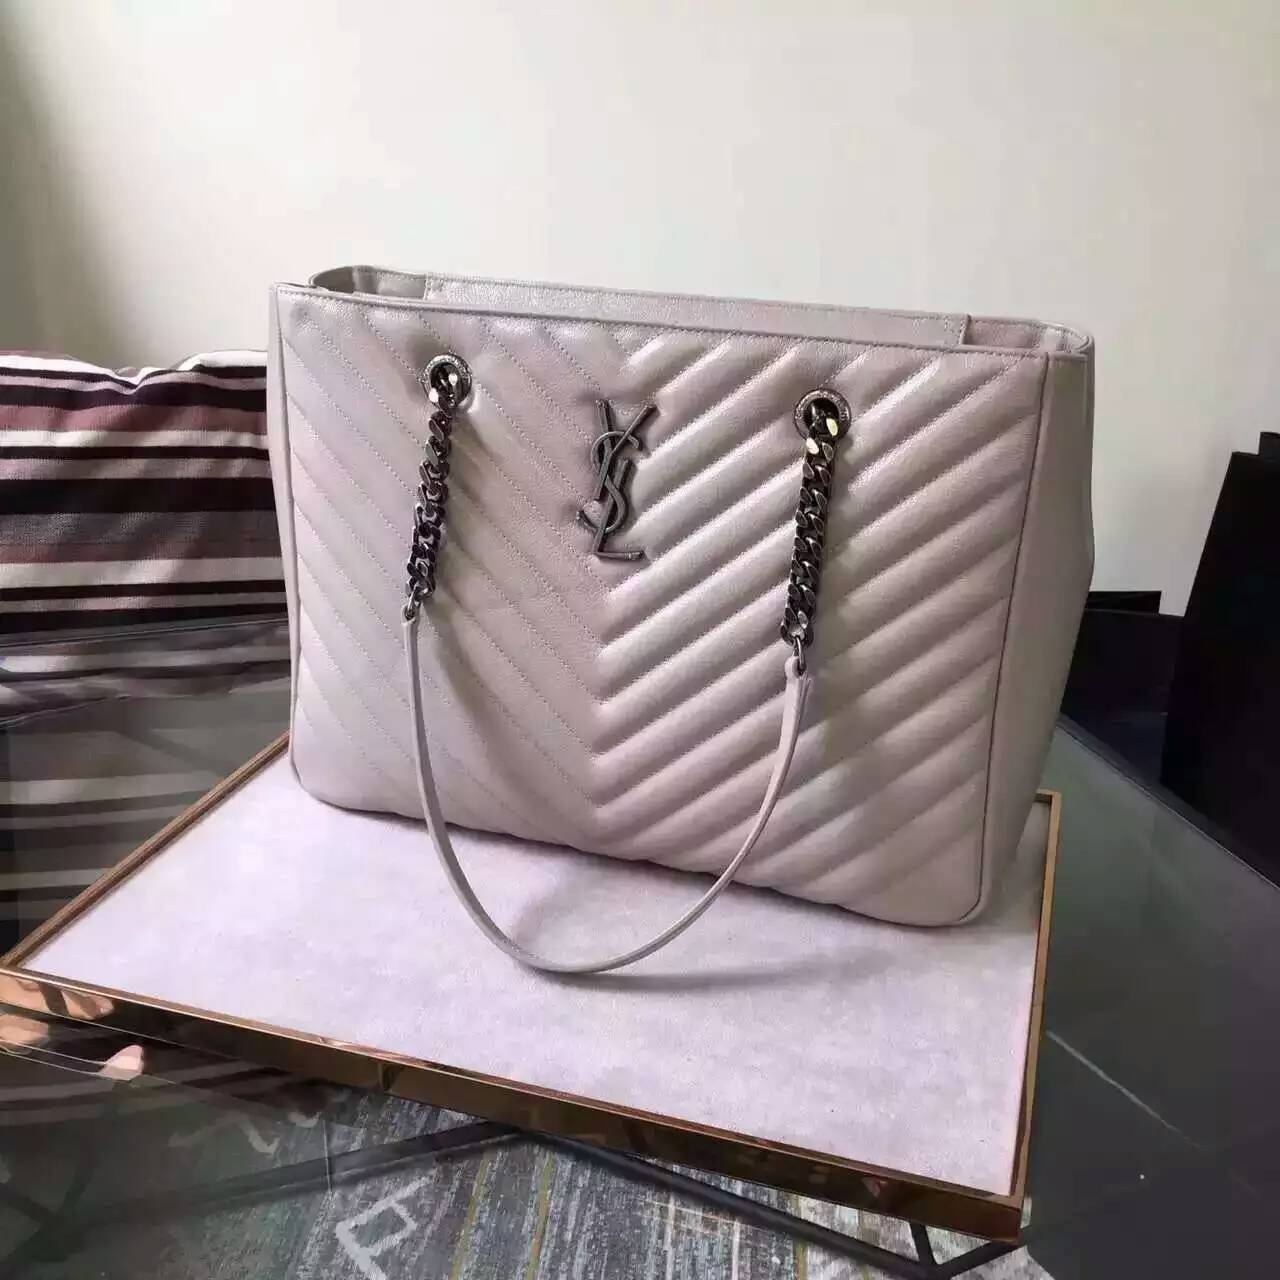 New Arrival!2016 Cheap YSL Out Sale with Free Shipping-Saint Laurent Classic Monogram Shopping Bag in Dove White MATELASSÉ Leather